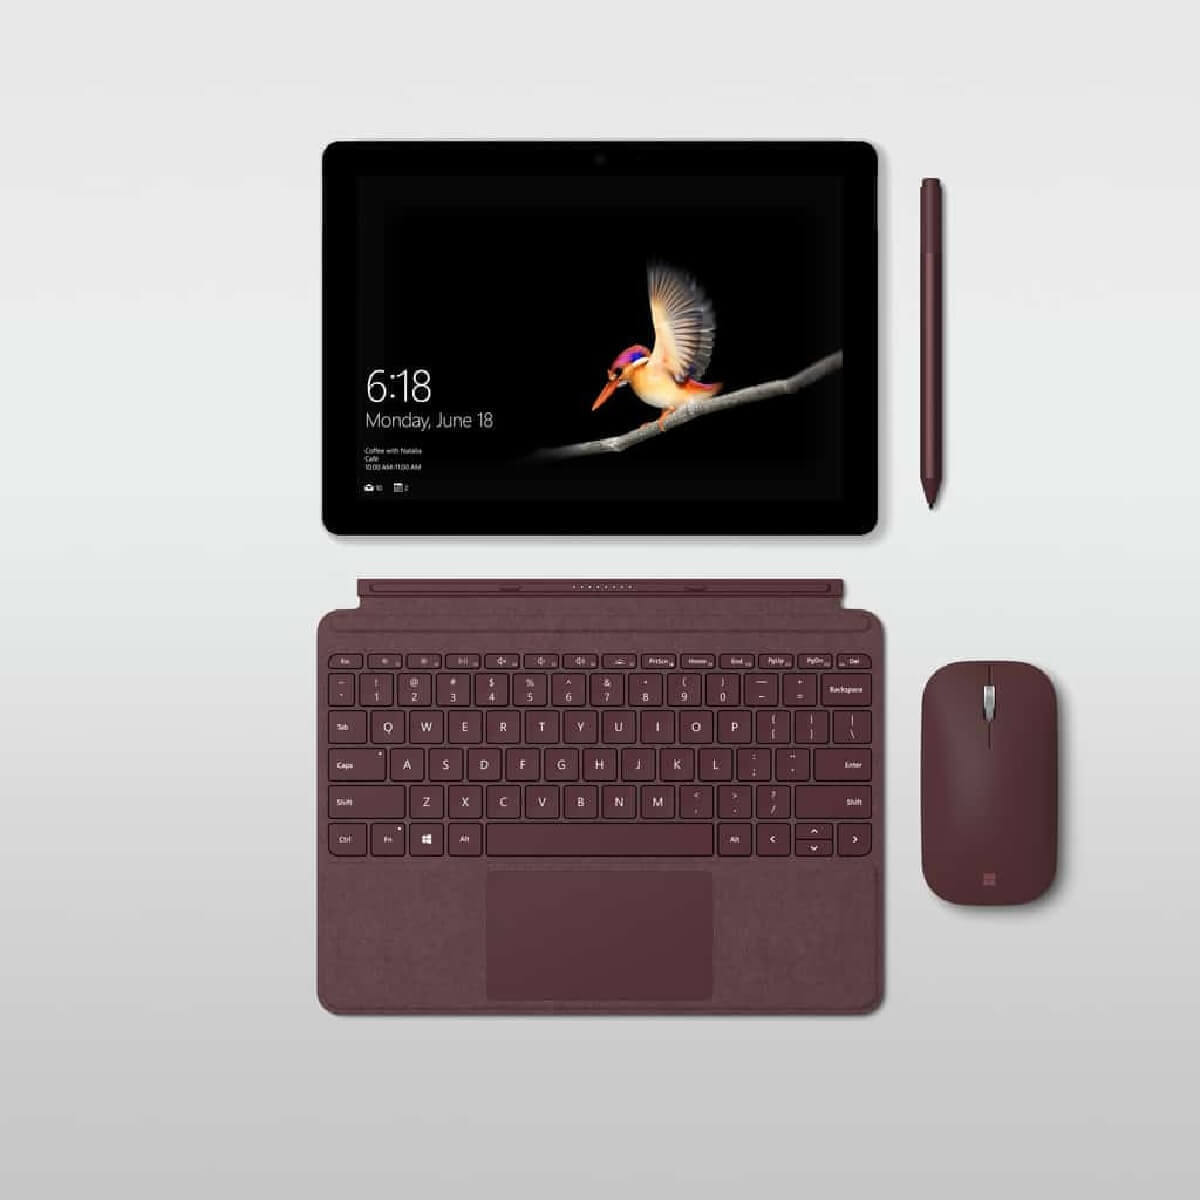 Surface mouse and keyboard revealed by FCC fillings